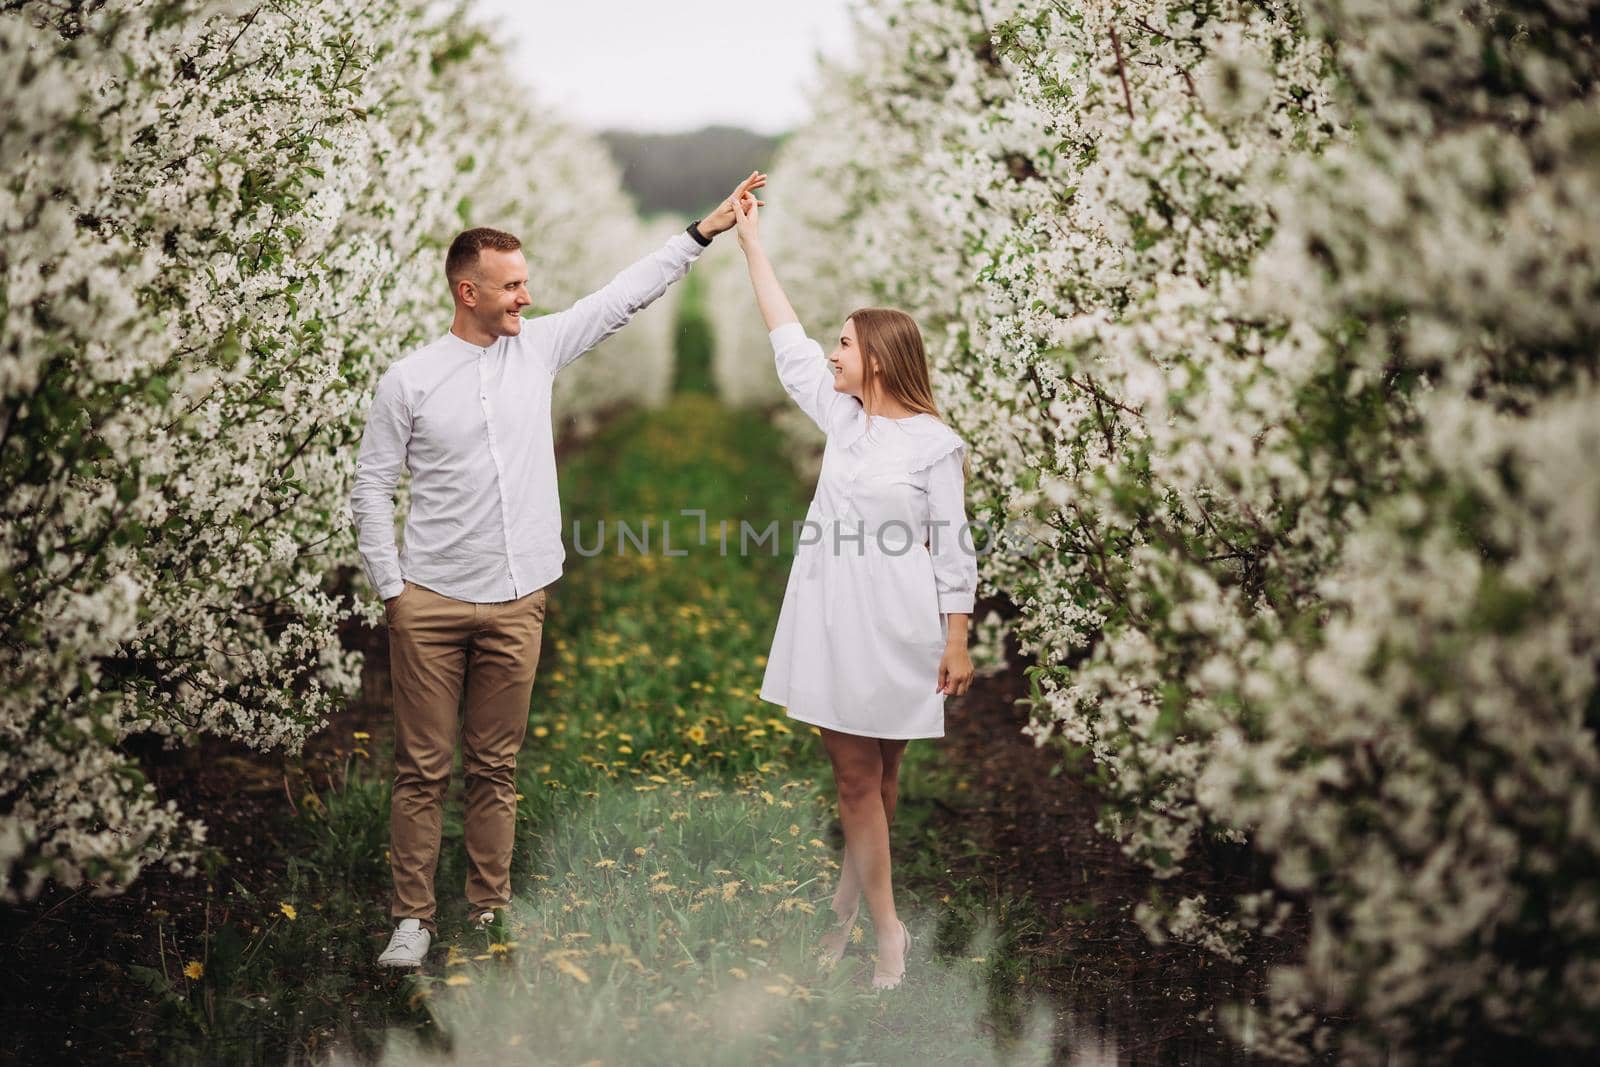 Happy family couple in spring blooming apple orchard. Young couple in love enjoy each other while walking in the garden. The man holds the woman's hand. Family relationships